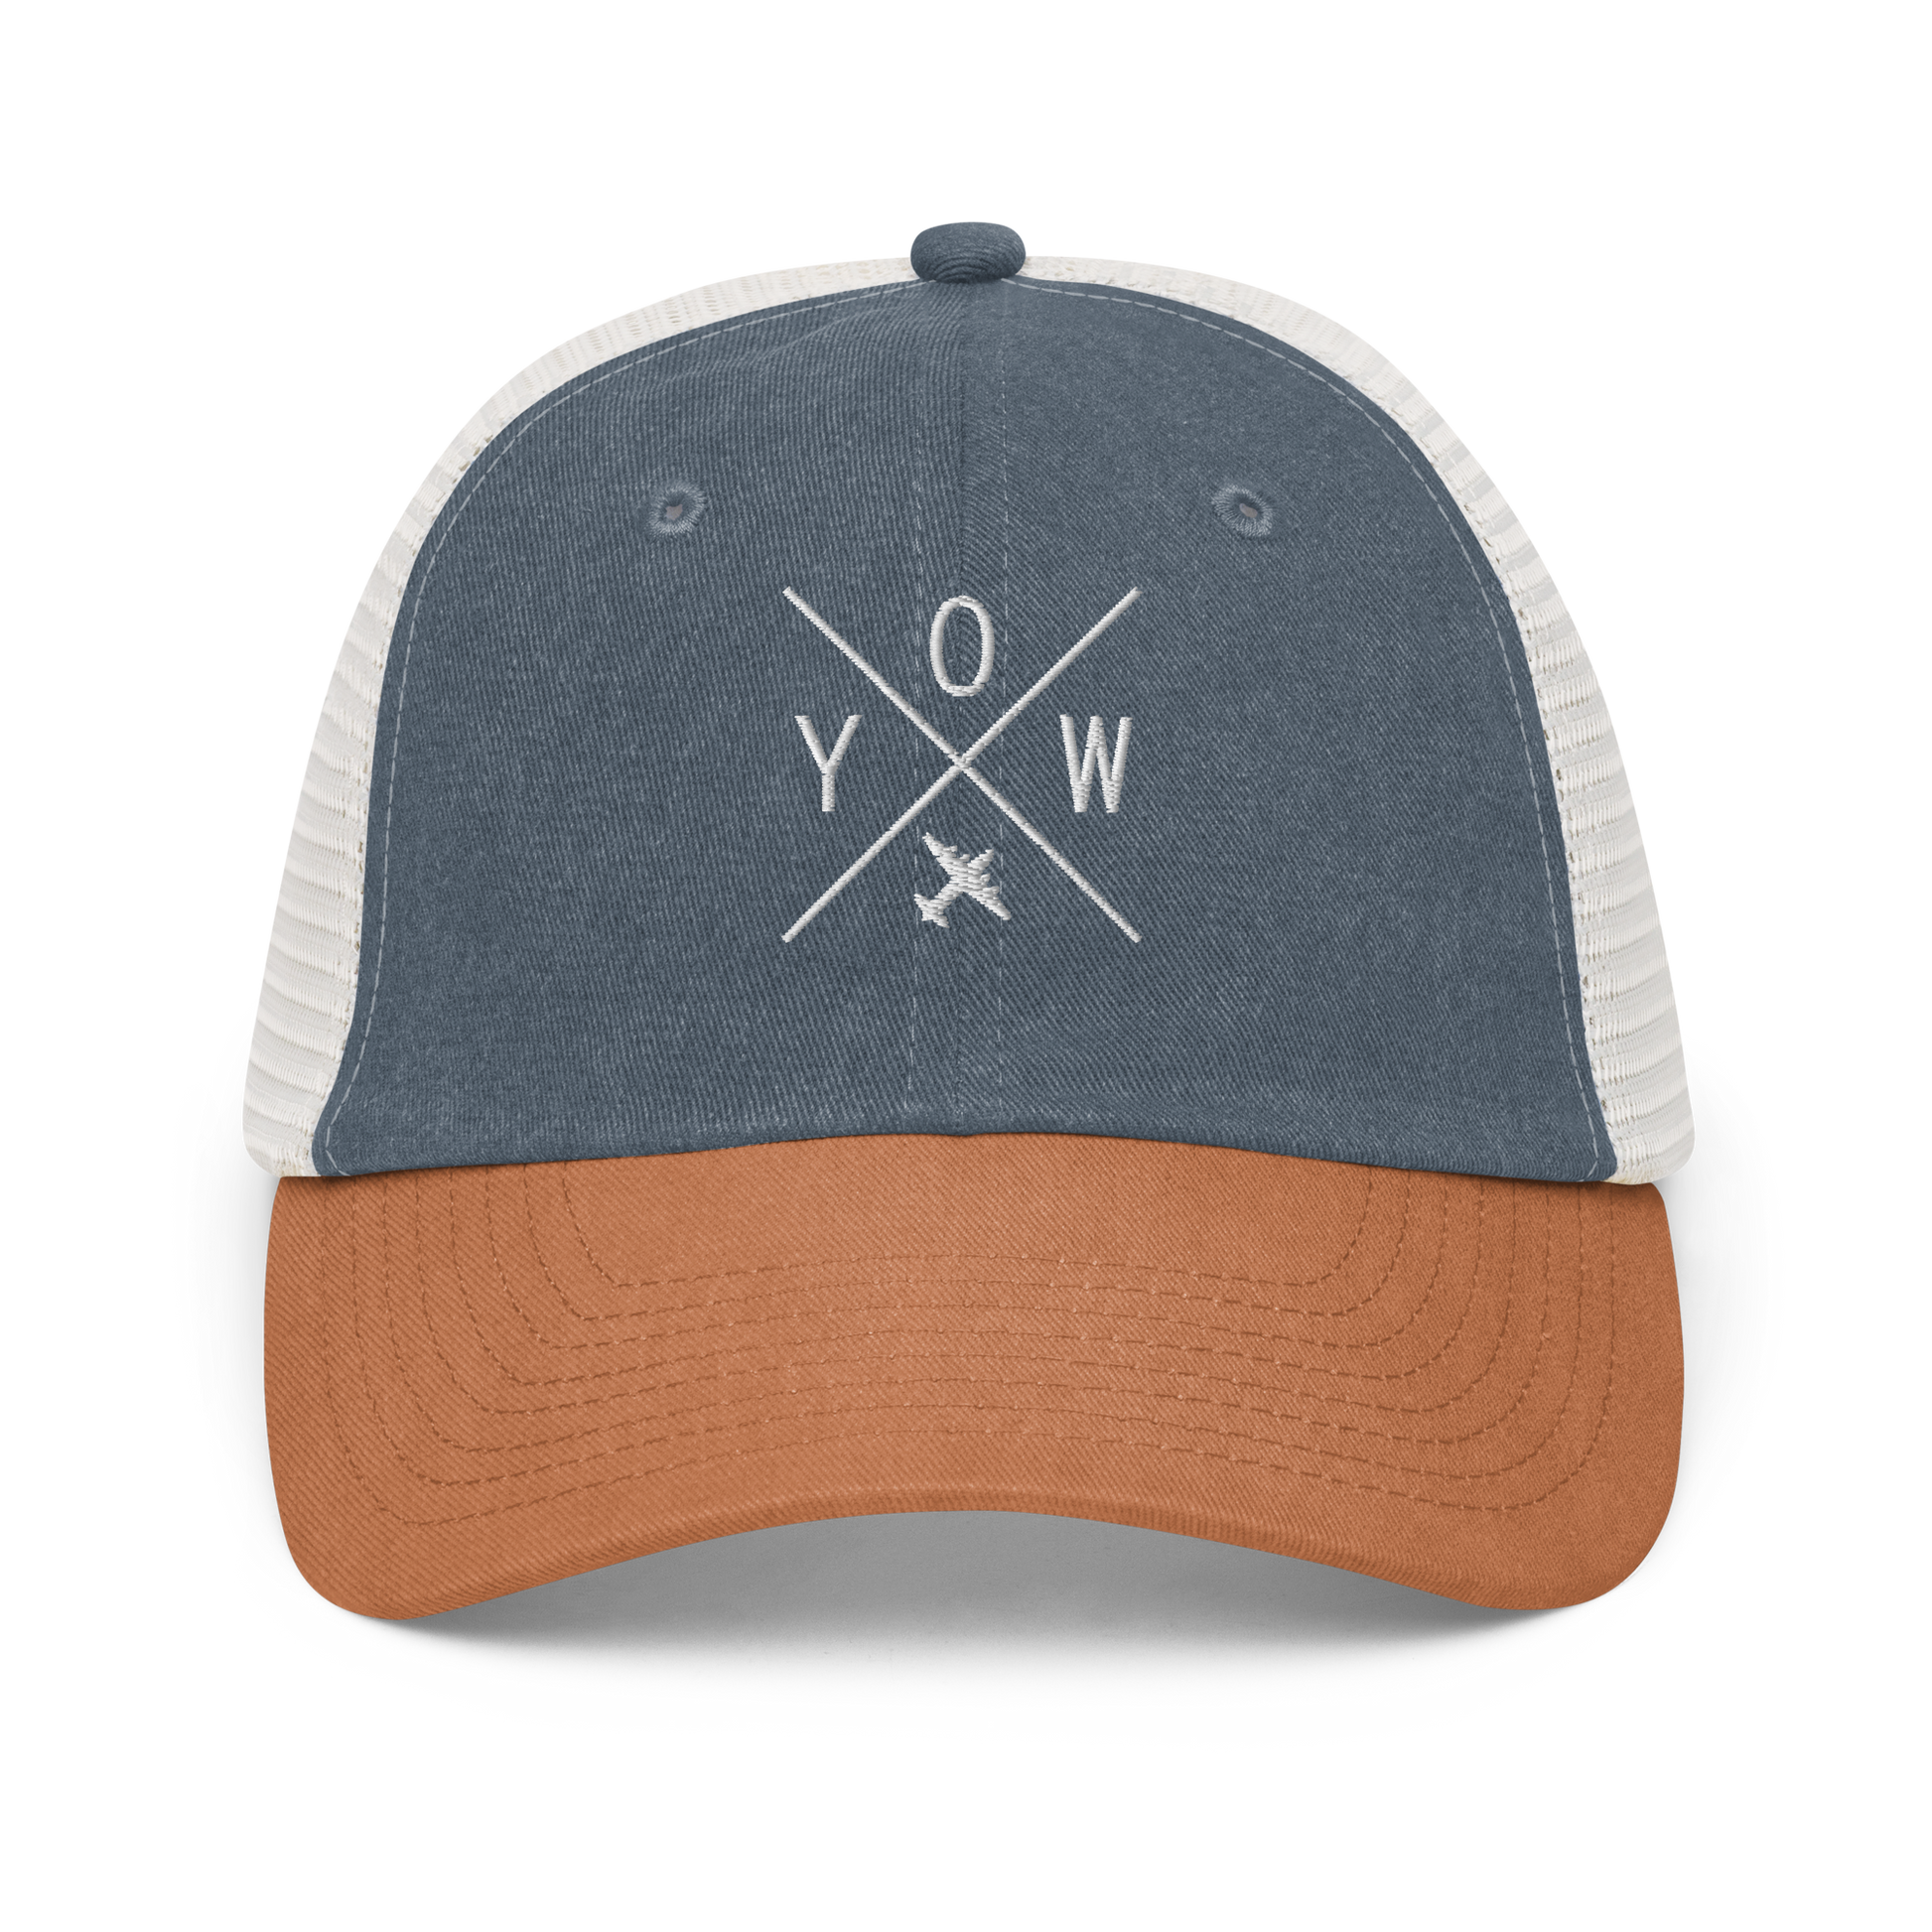 YHM Designs - YOW Ottawa Pigment-Dyed Trucker Cap - Crossed-X Design with Airport Code and Vintage Propliner - White Embroidery - Image 15